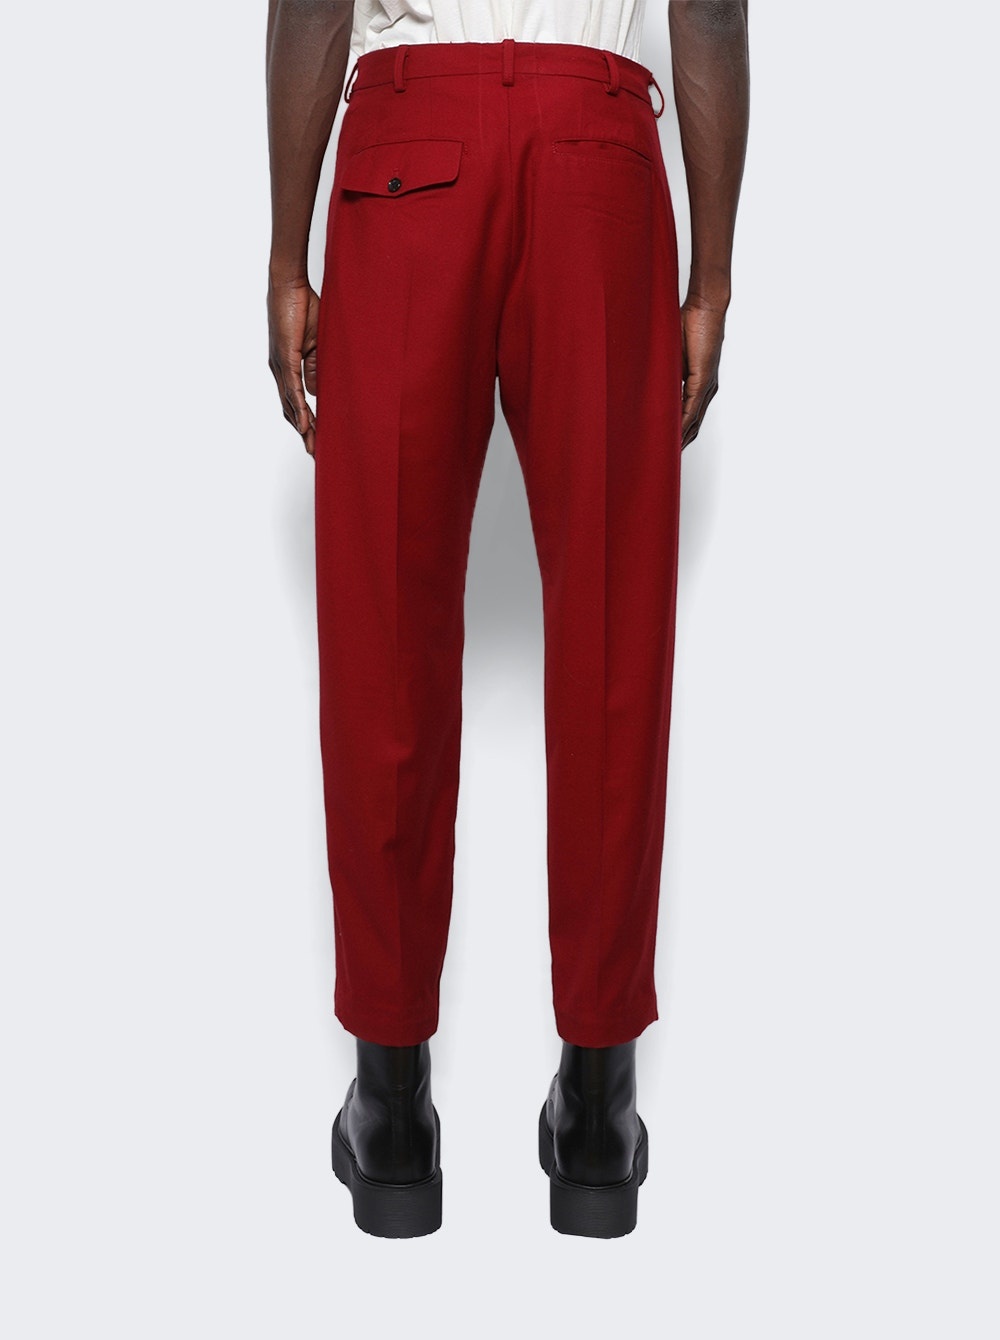 Solitaire Trouser Scarlet Red - 5